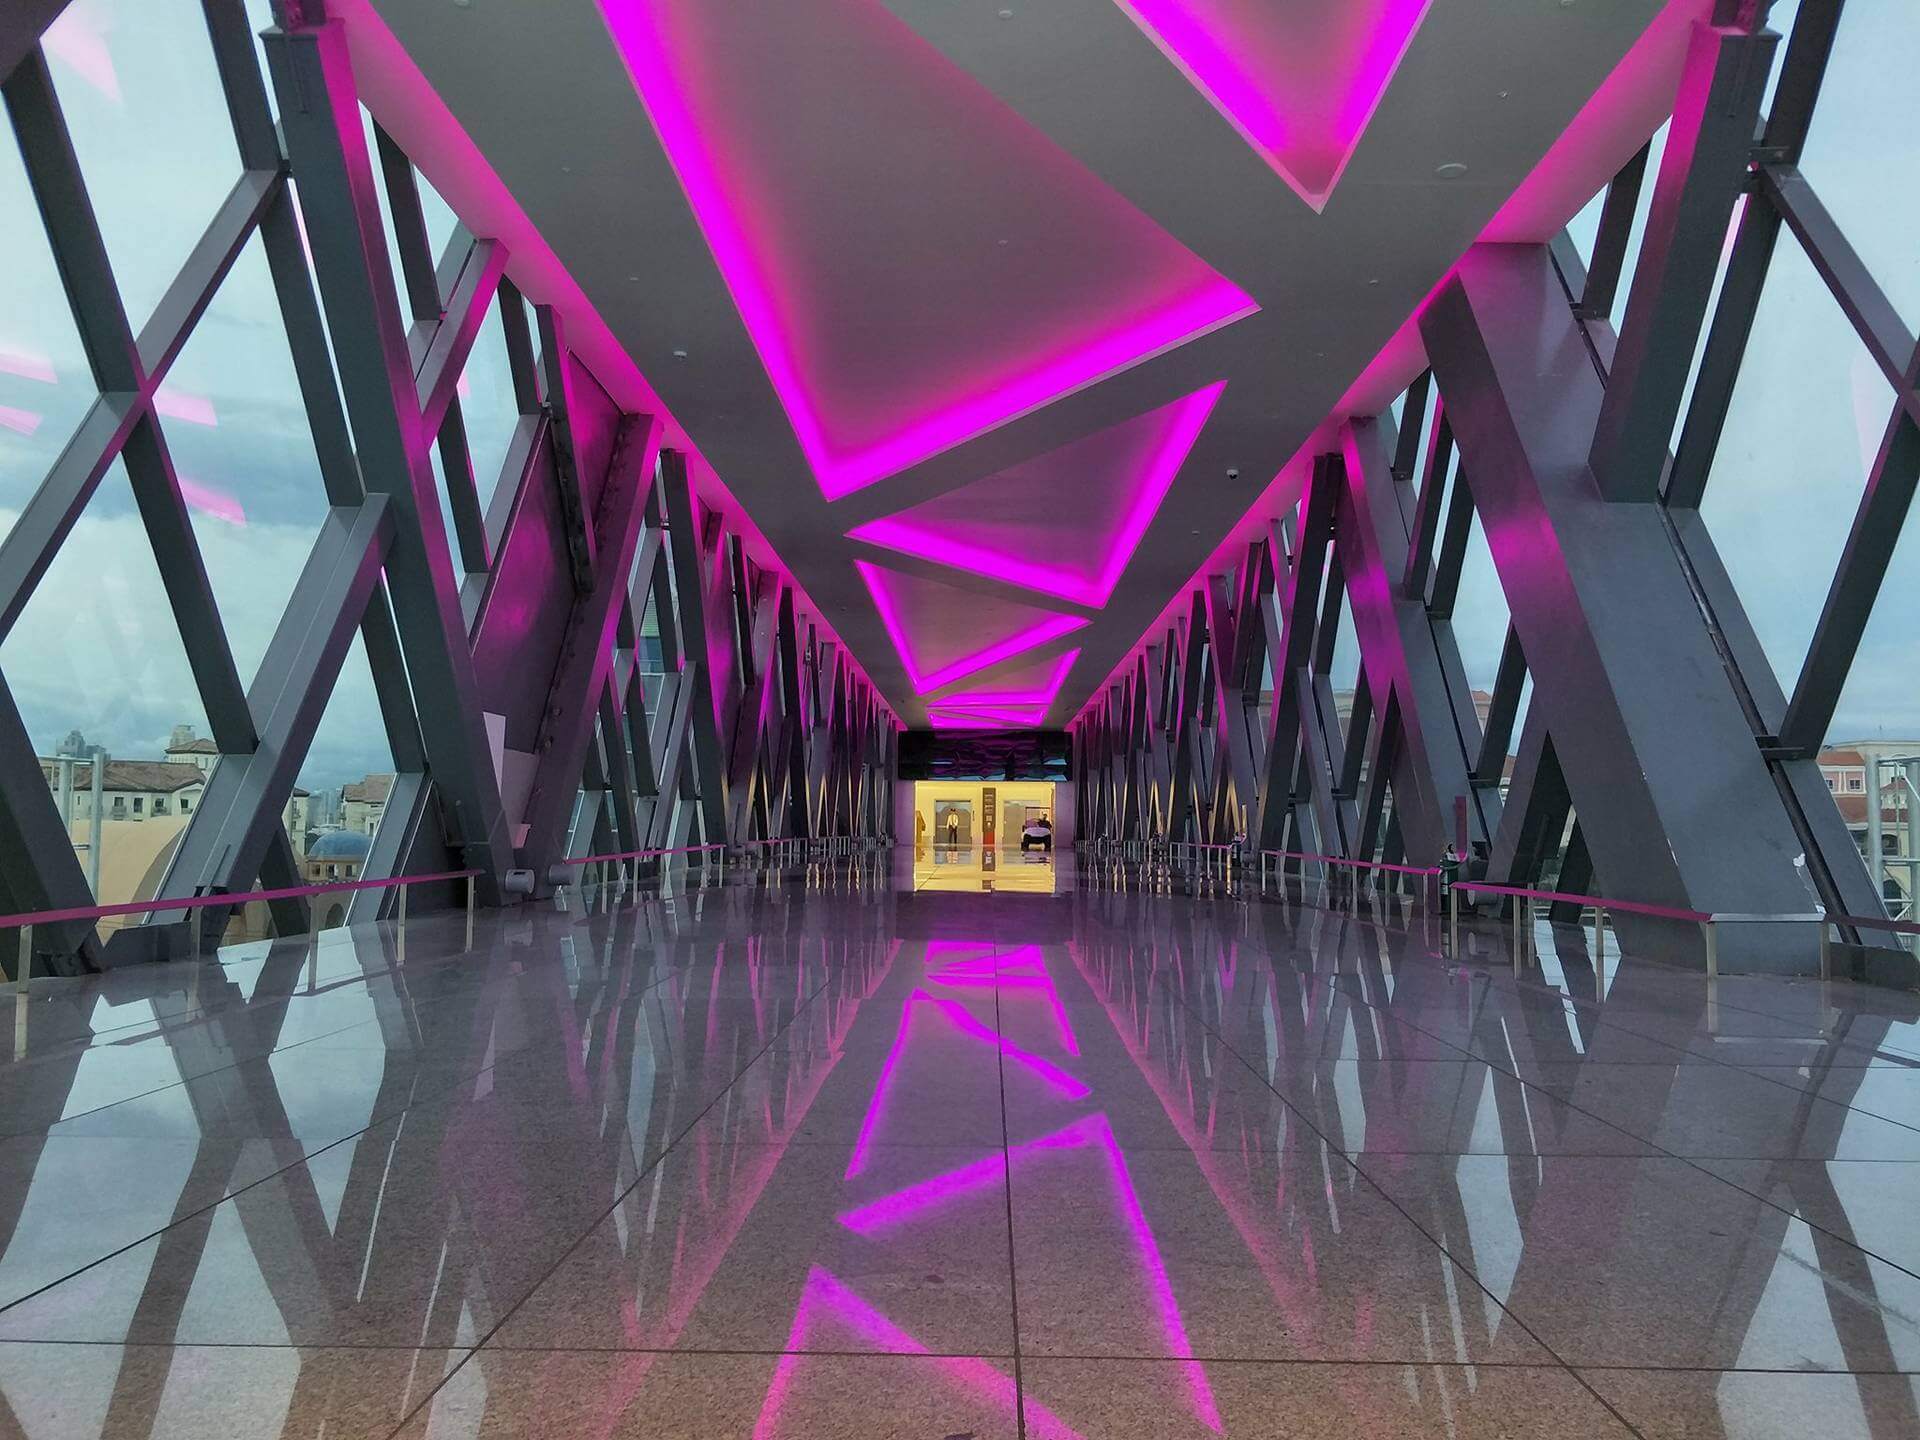 Walkway connecting the airport and Belmont Hotel